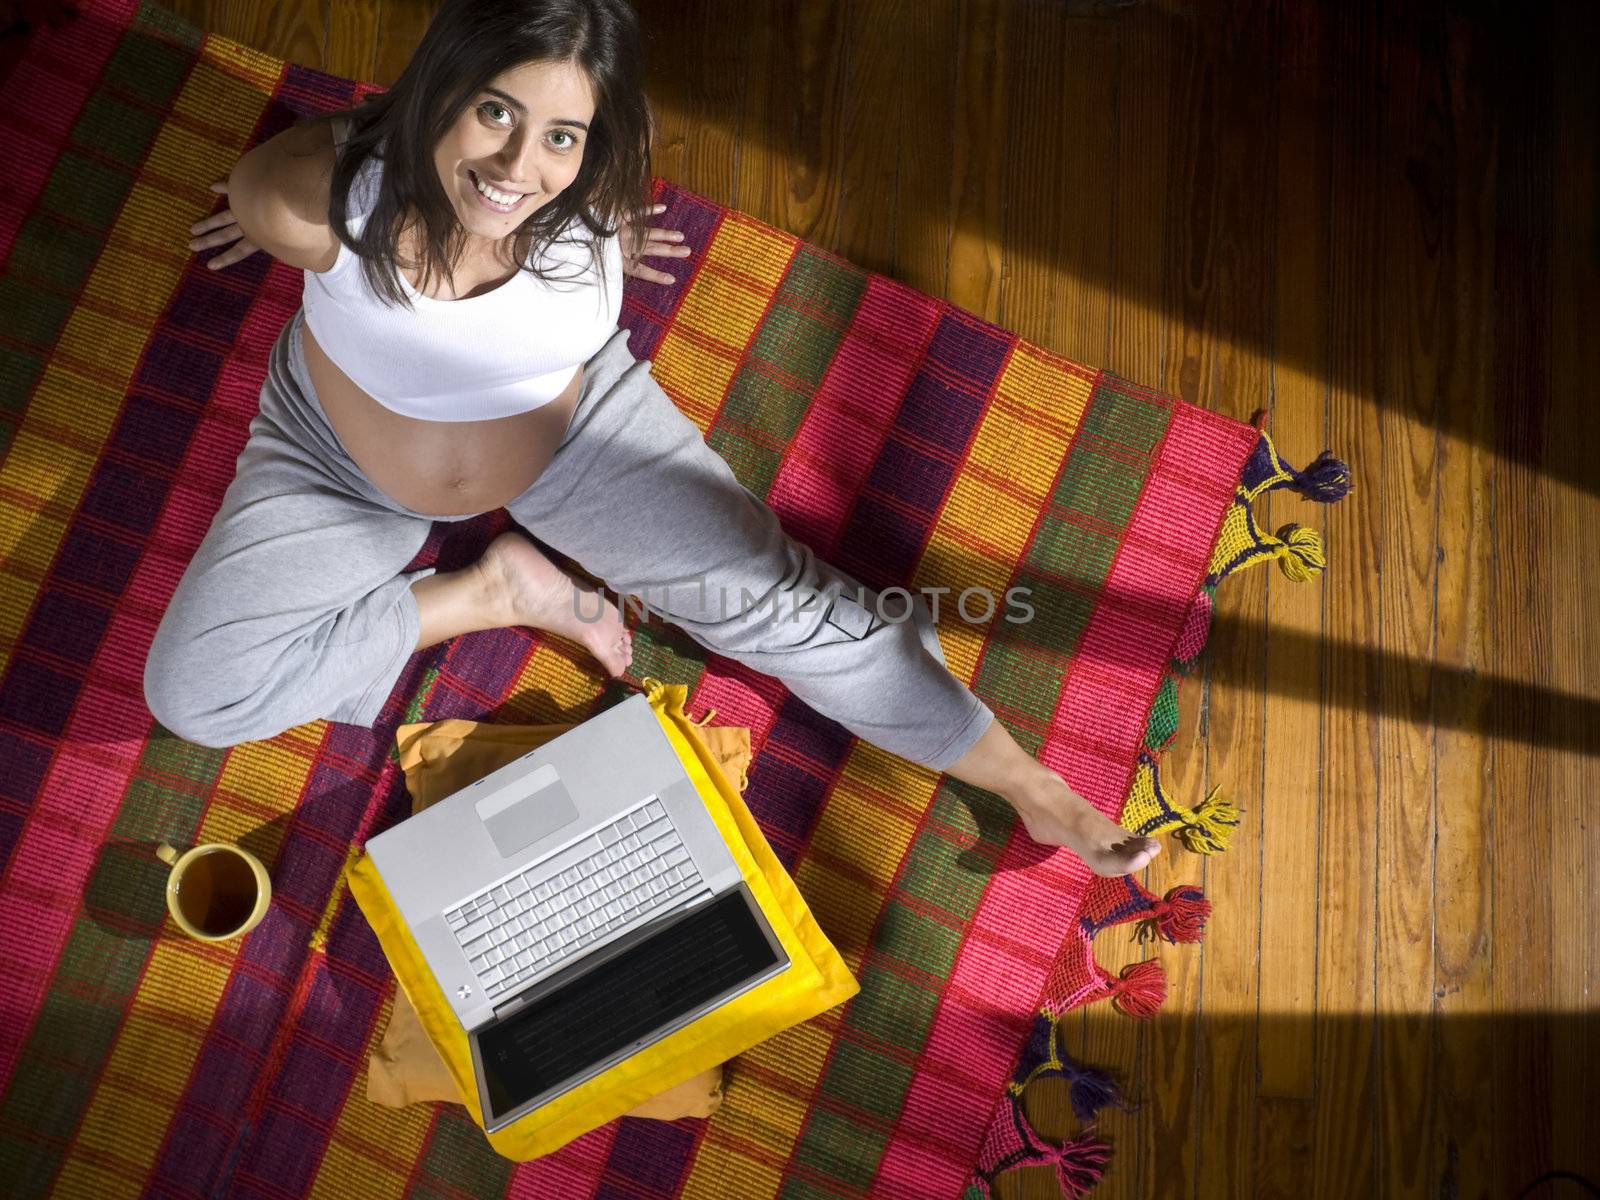 Top view of a young pregnant woman seated on a colorful rug with a laptop computer and a cup of tea.